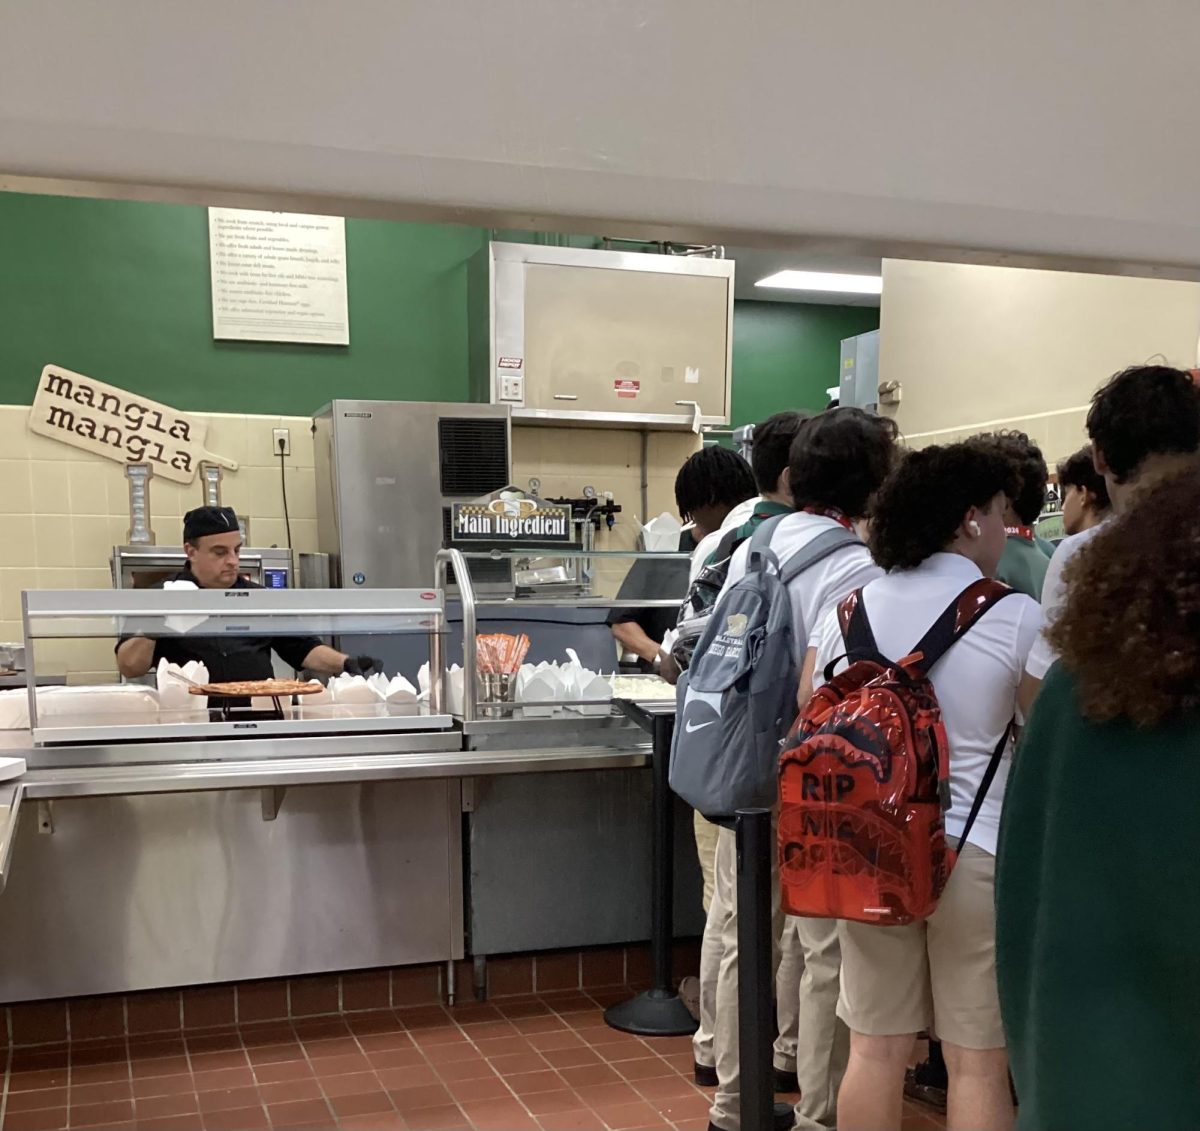 Students wait eagerly in the lunch line to be served another tasty meal courtesy of SAGE Dining.